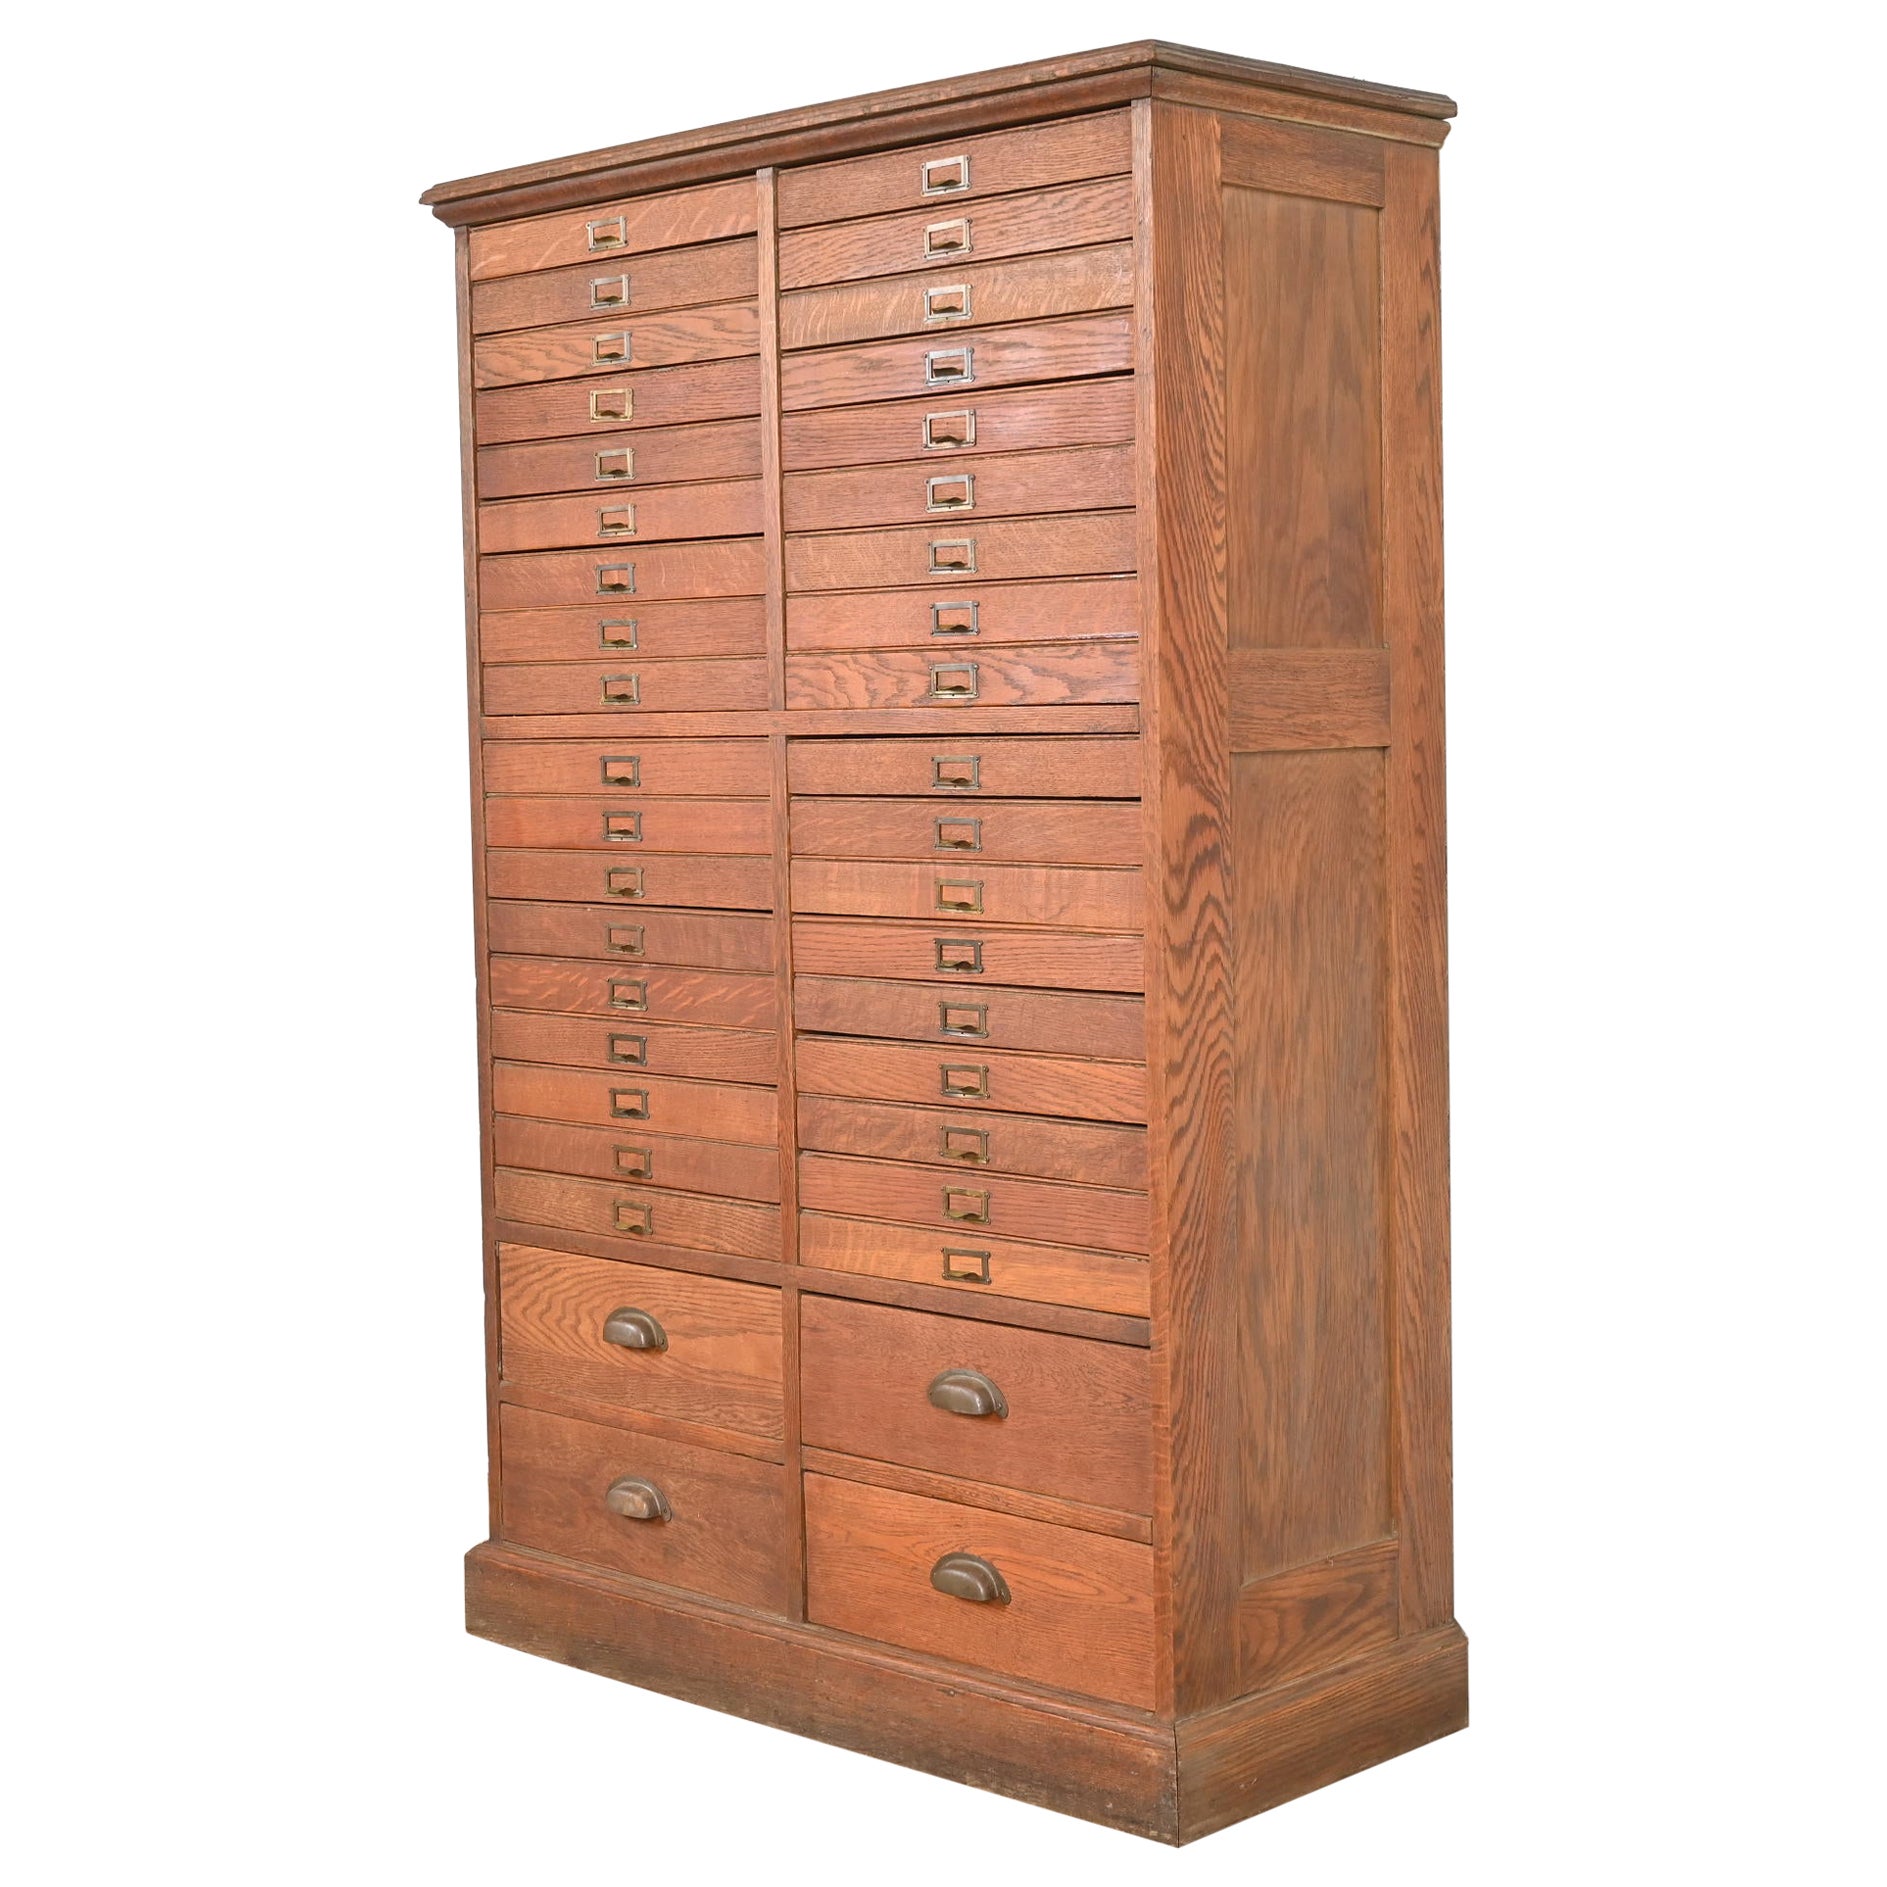 Antique Arts & Crafts Oak 40-Drawer File Cabinet or Chest of Drawers, Circa 1900 For Sale